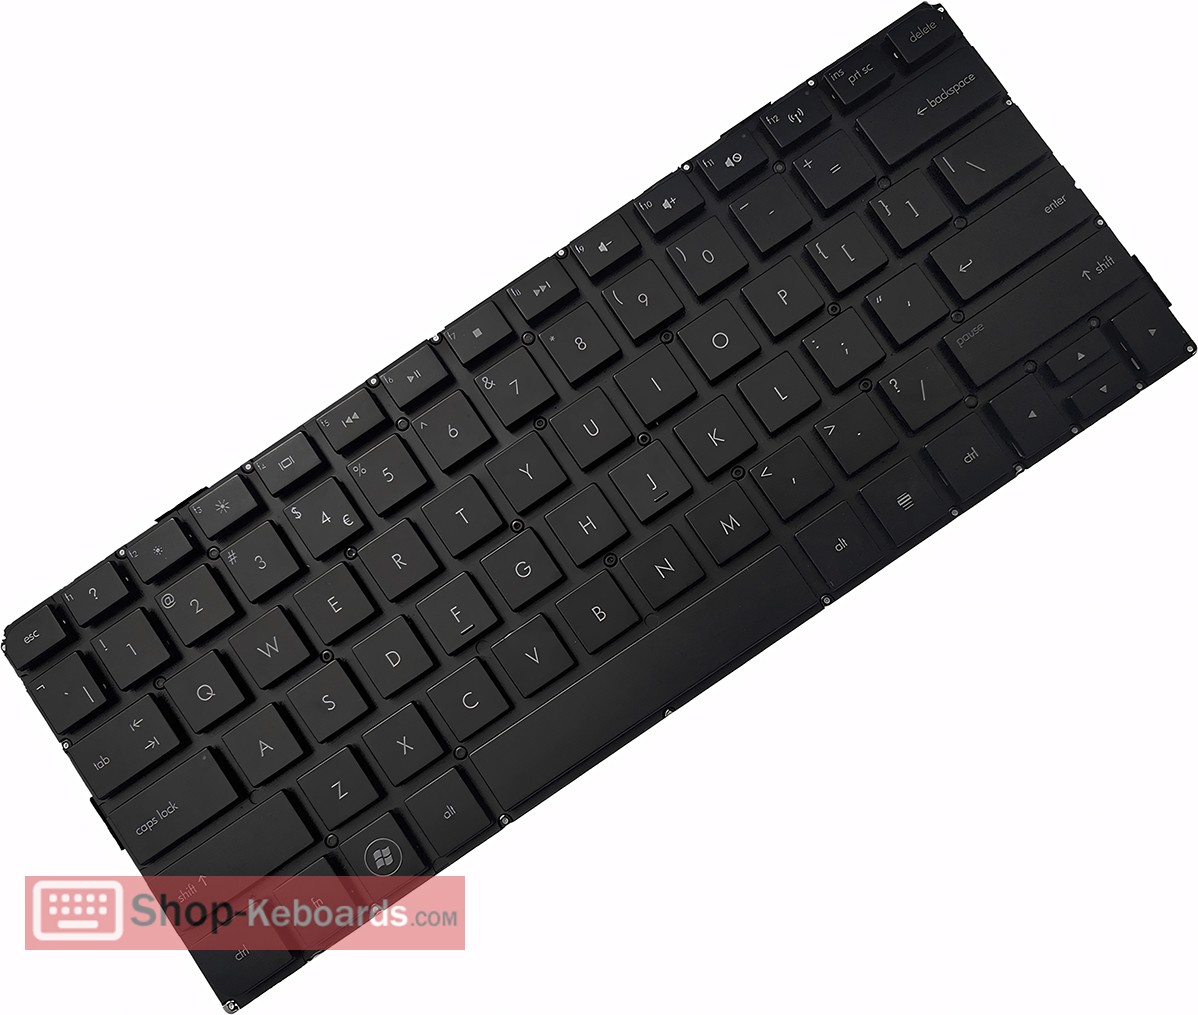 HP ENVY 13-1020 SERIES Keyboard replacement